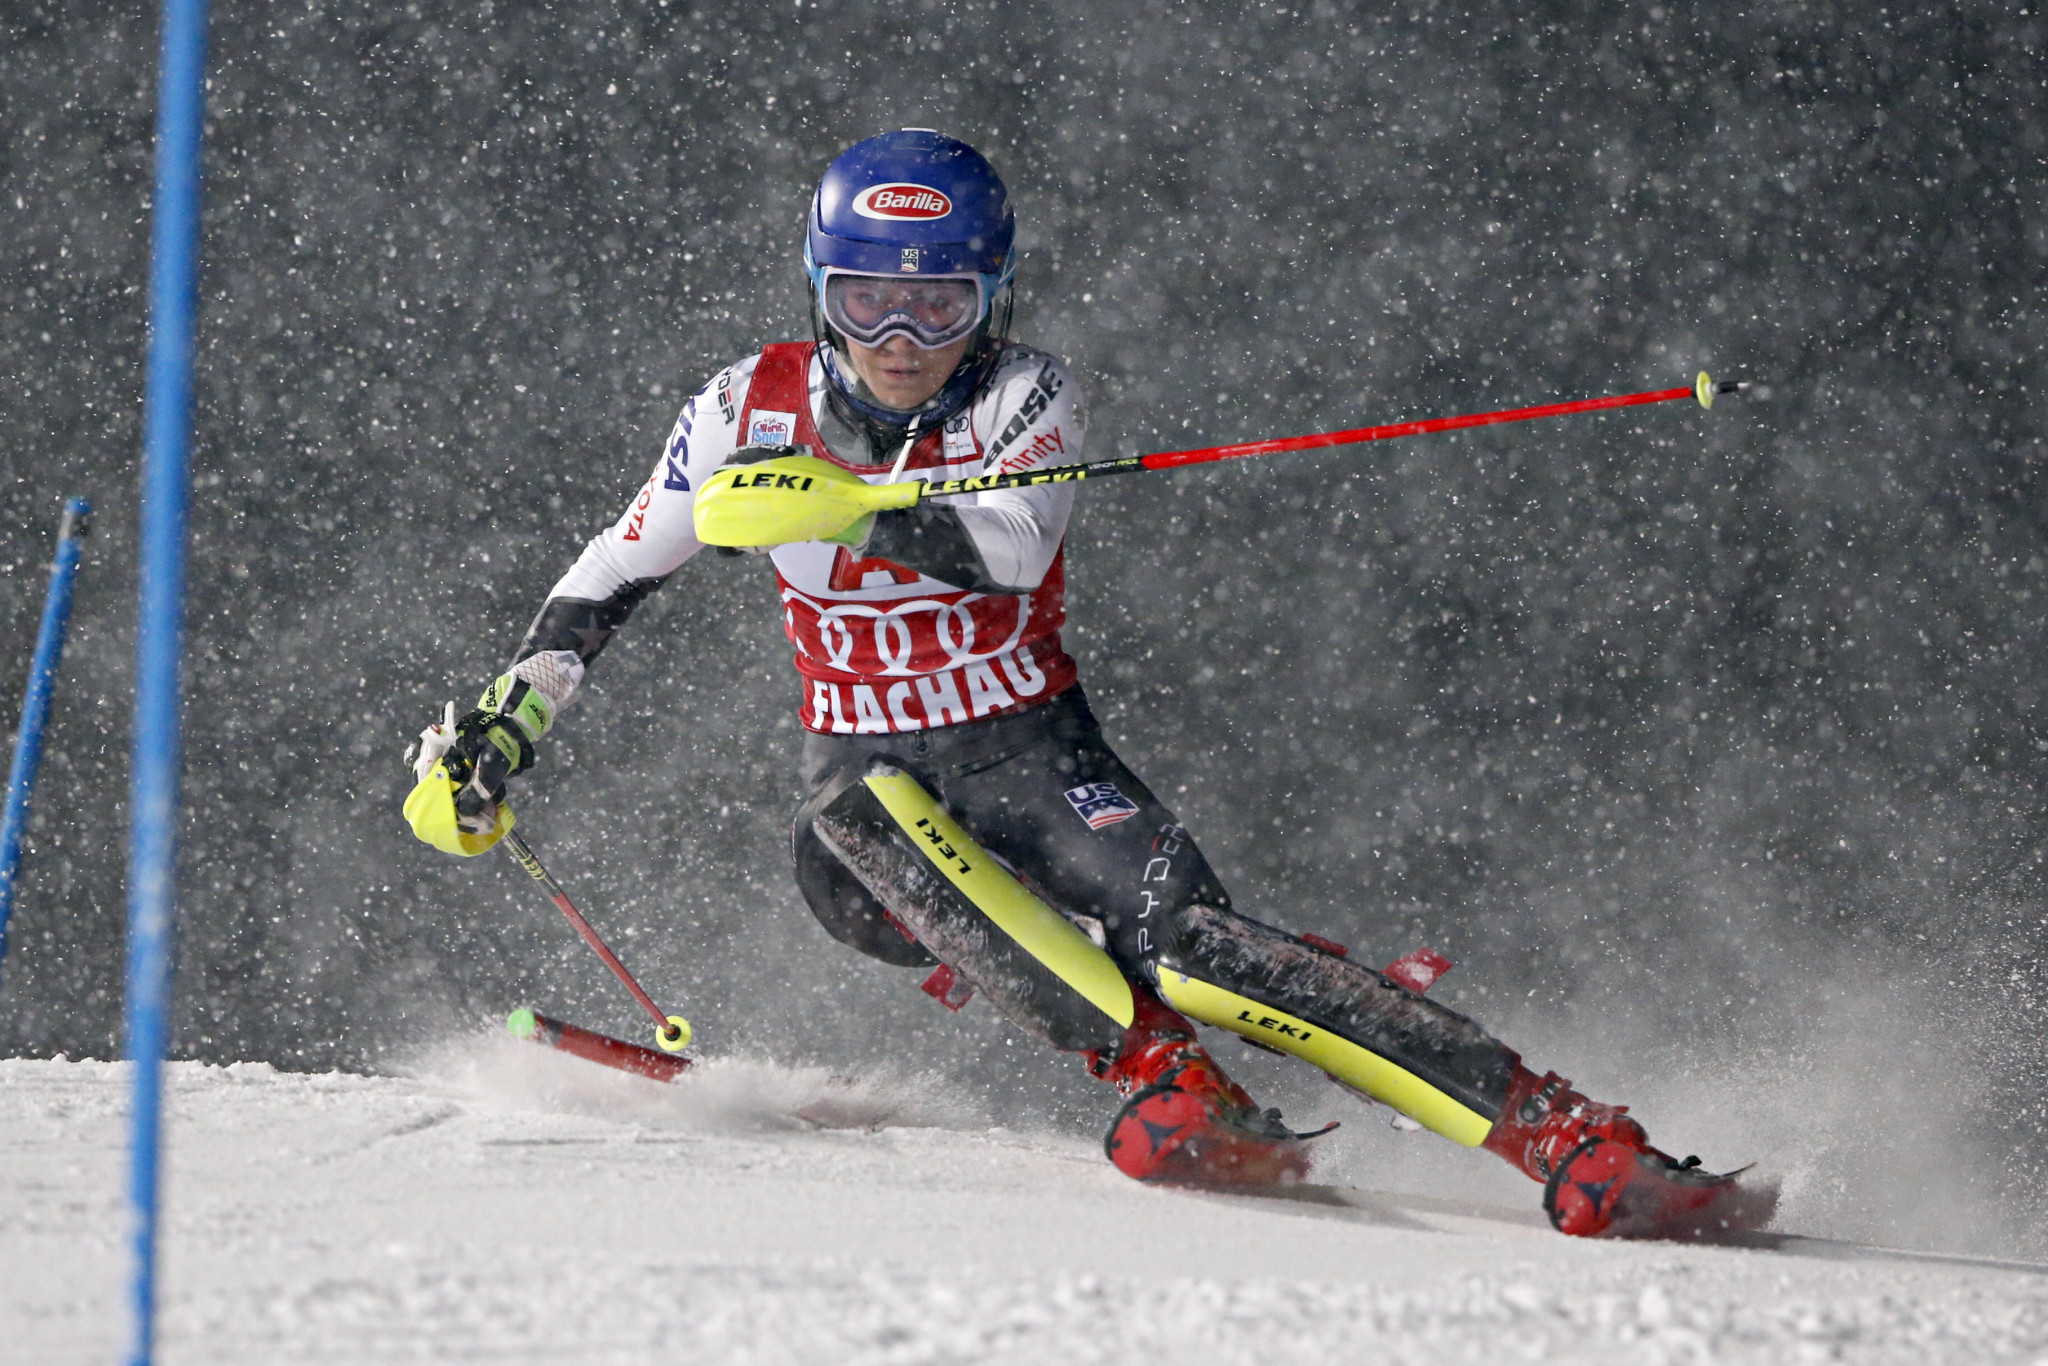 Mikaela Shiffrin initially led but could not match Petra Vlhova on the second run ©Getty Images